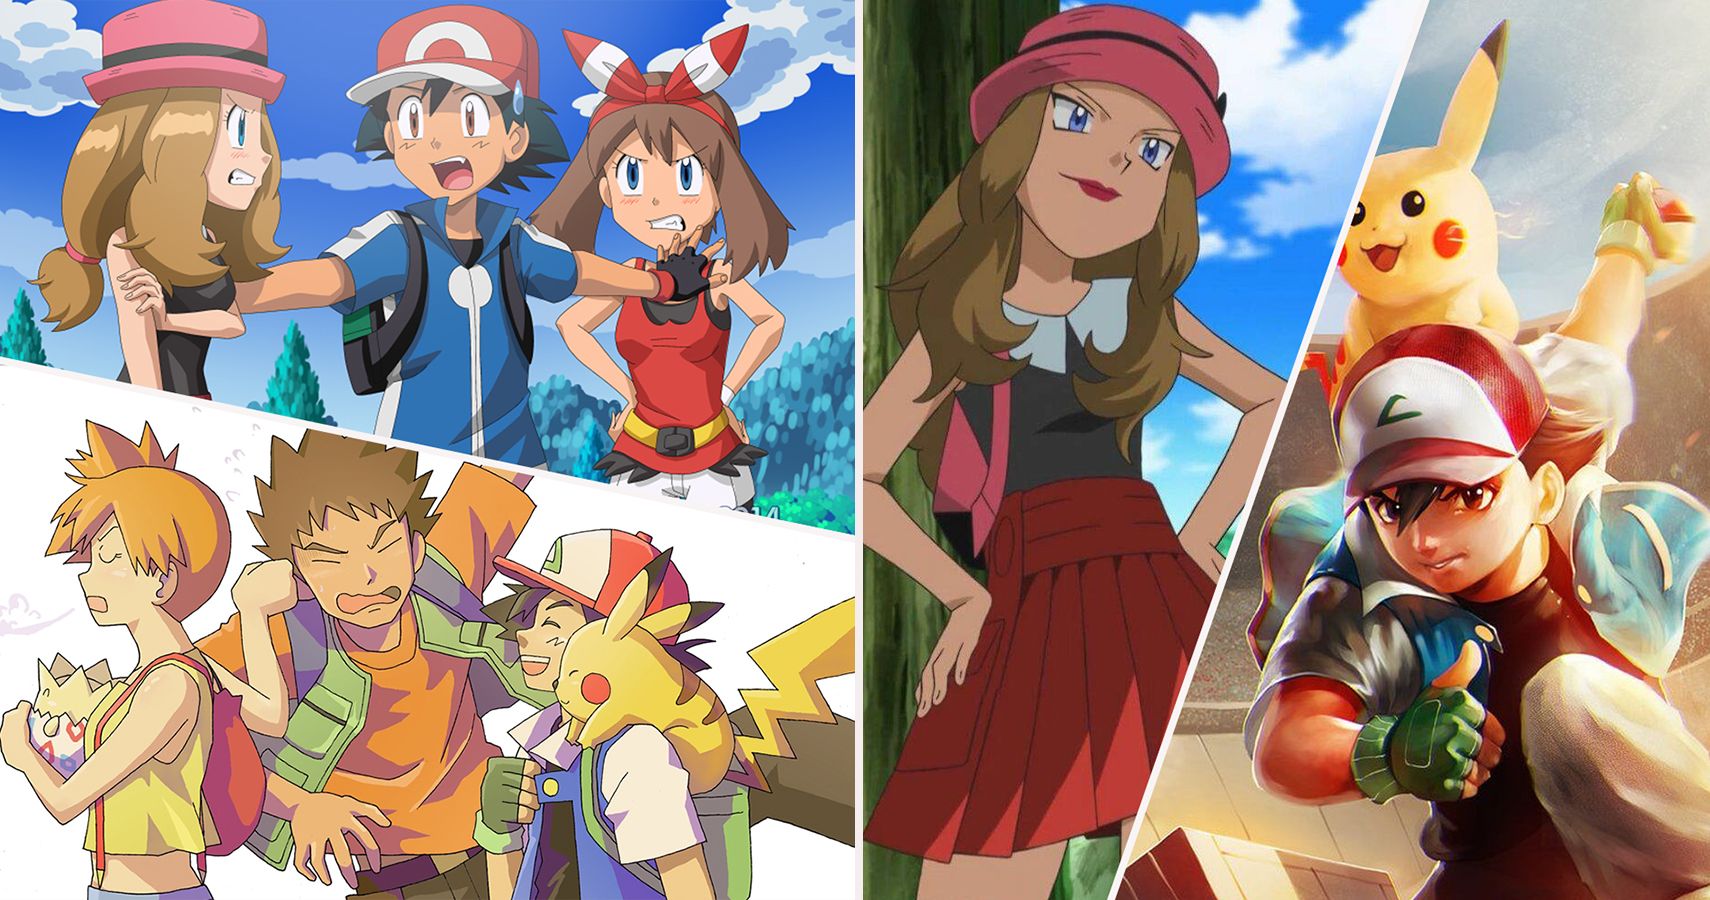 First Look at Pokemons New Anime Protagonists Revealed